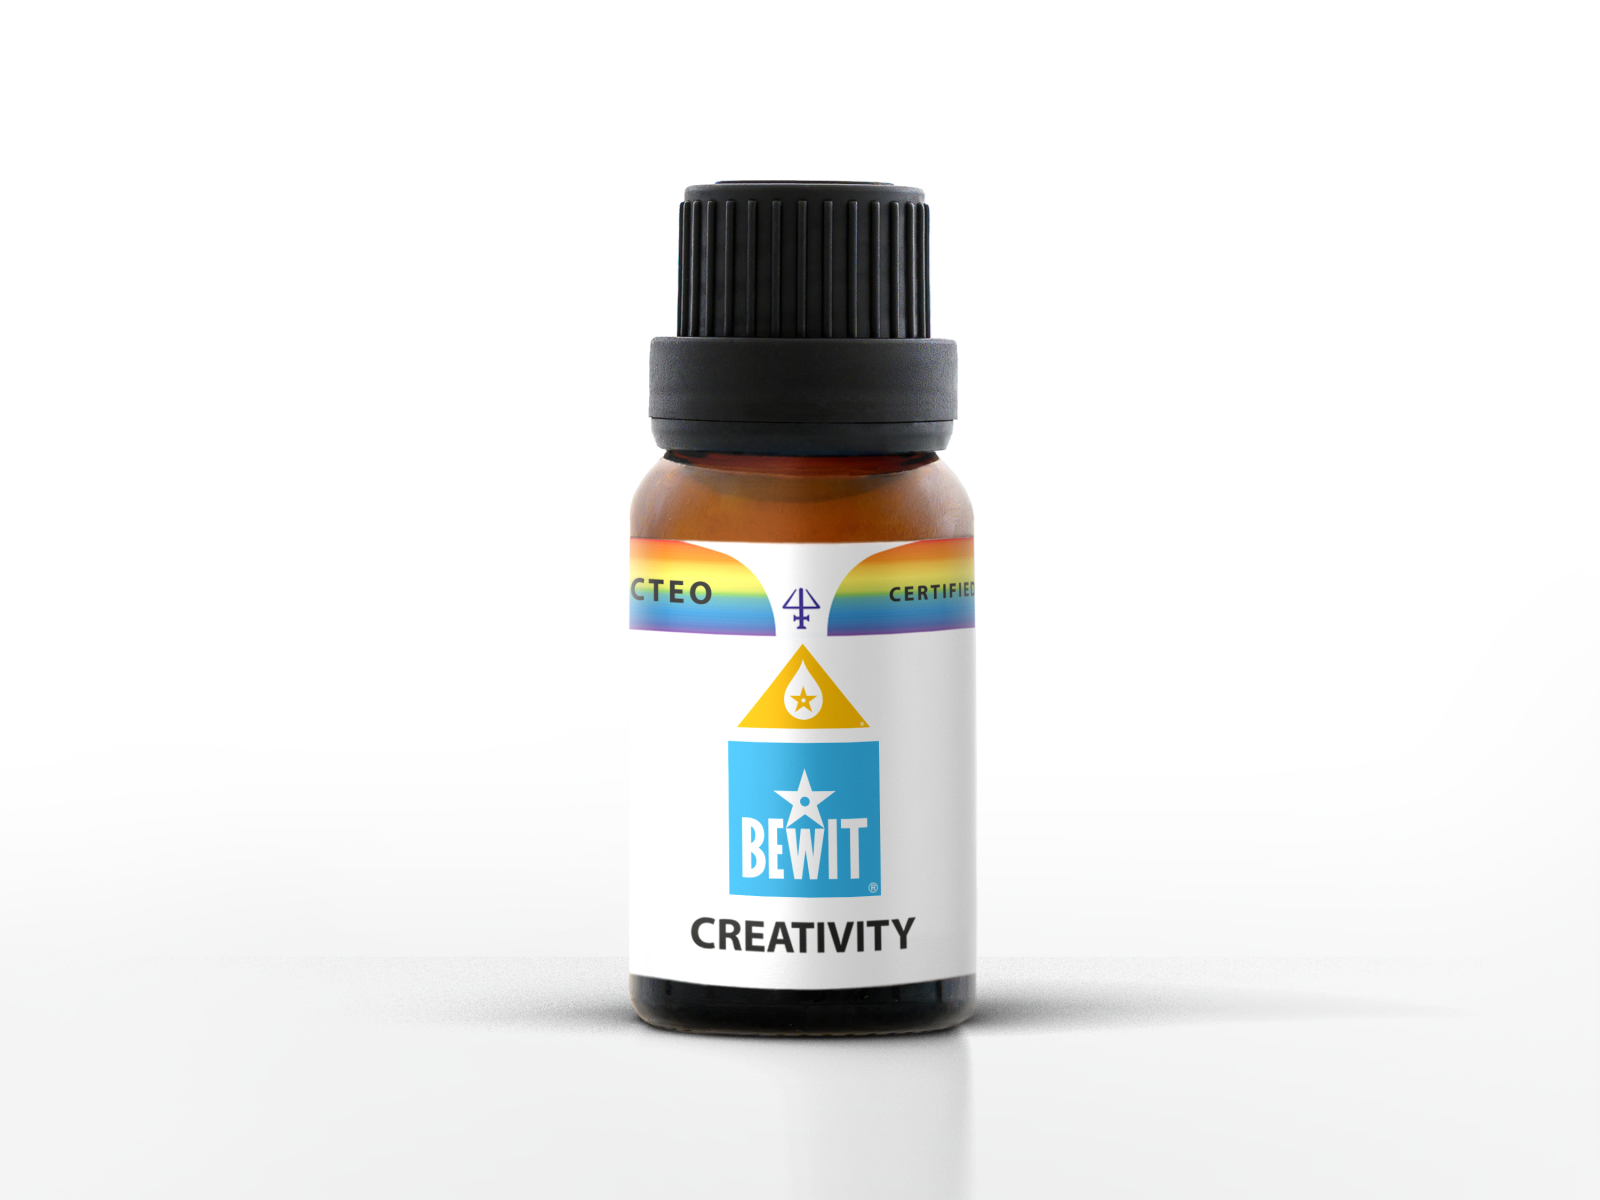 BEWIT CREATIVITY - This is a unique blend of the essential oils - 1